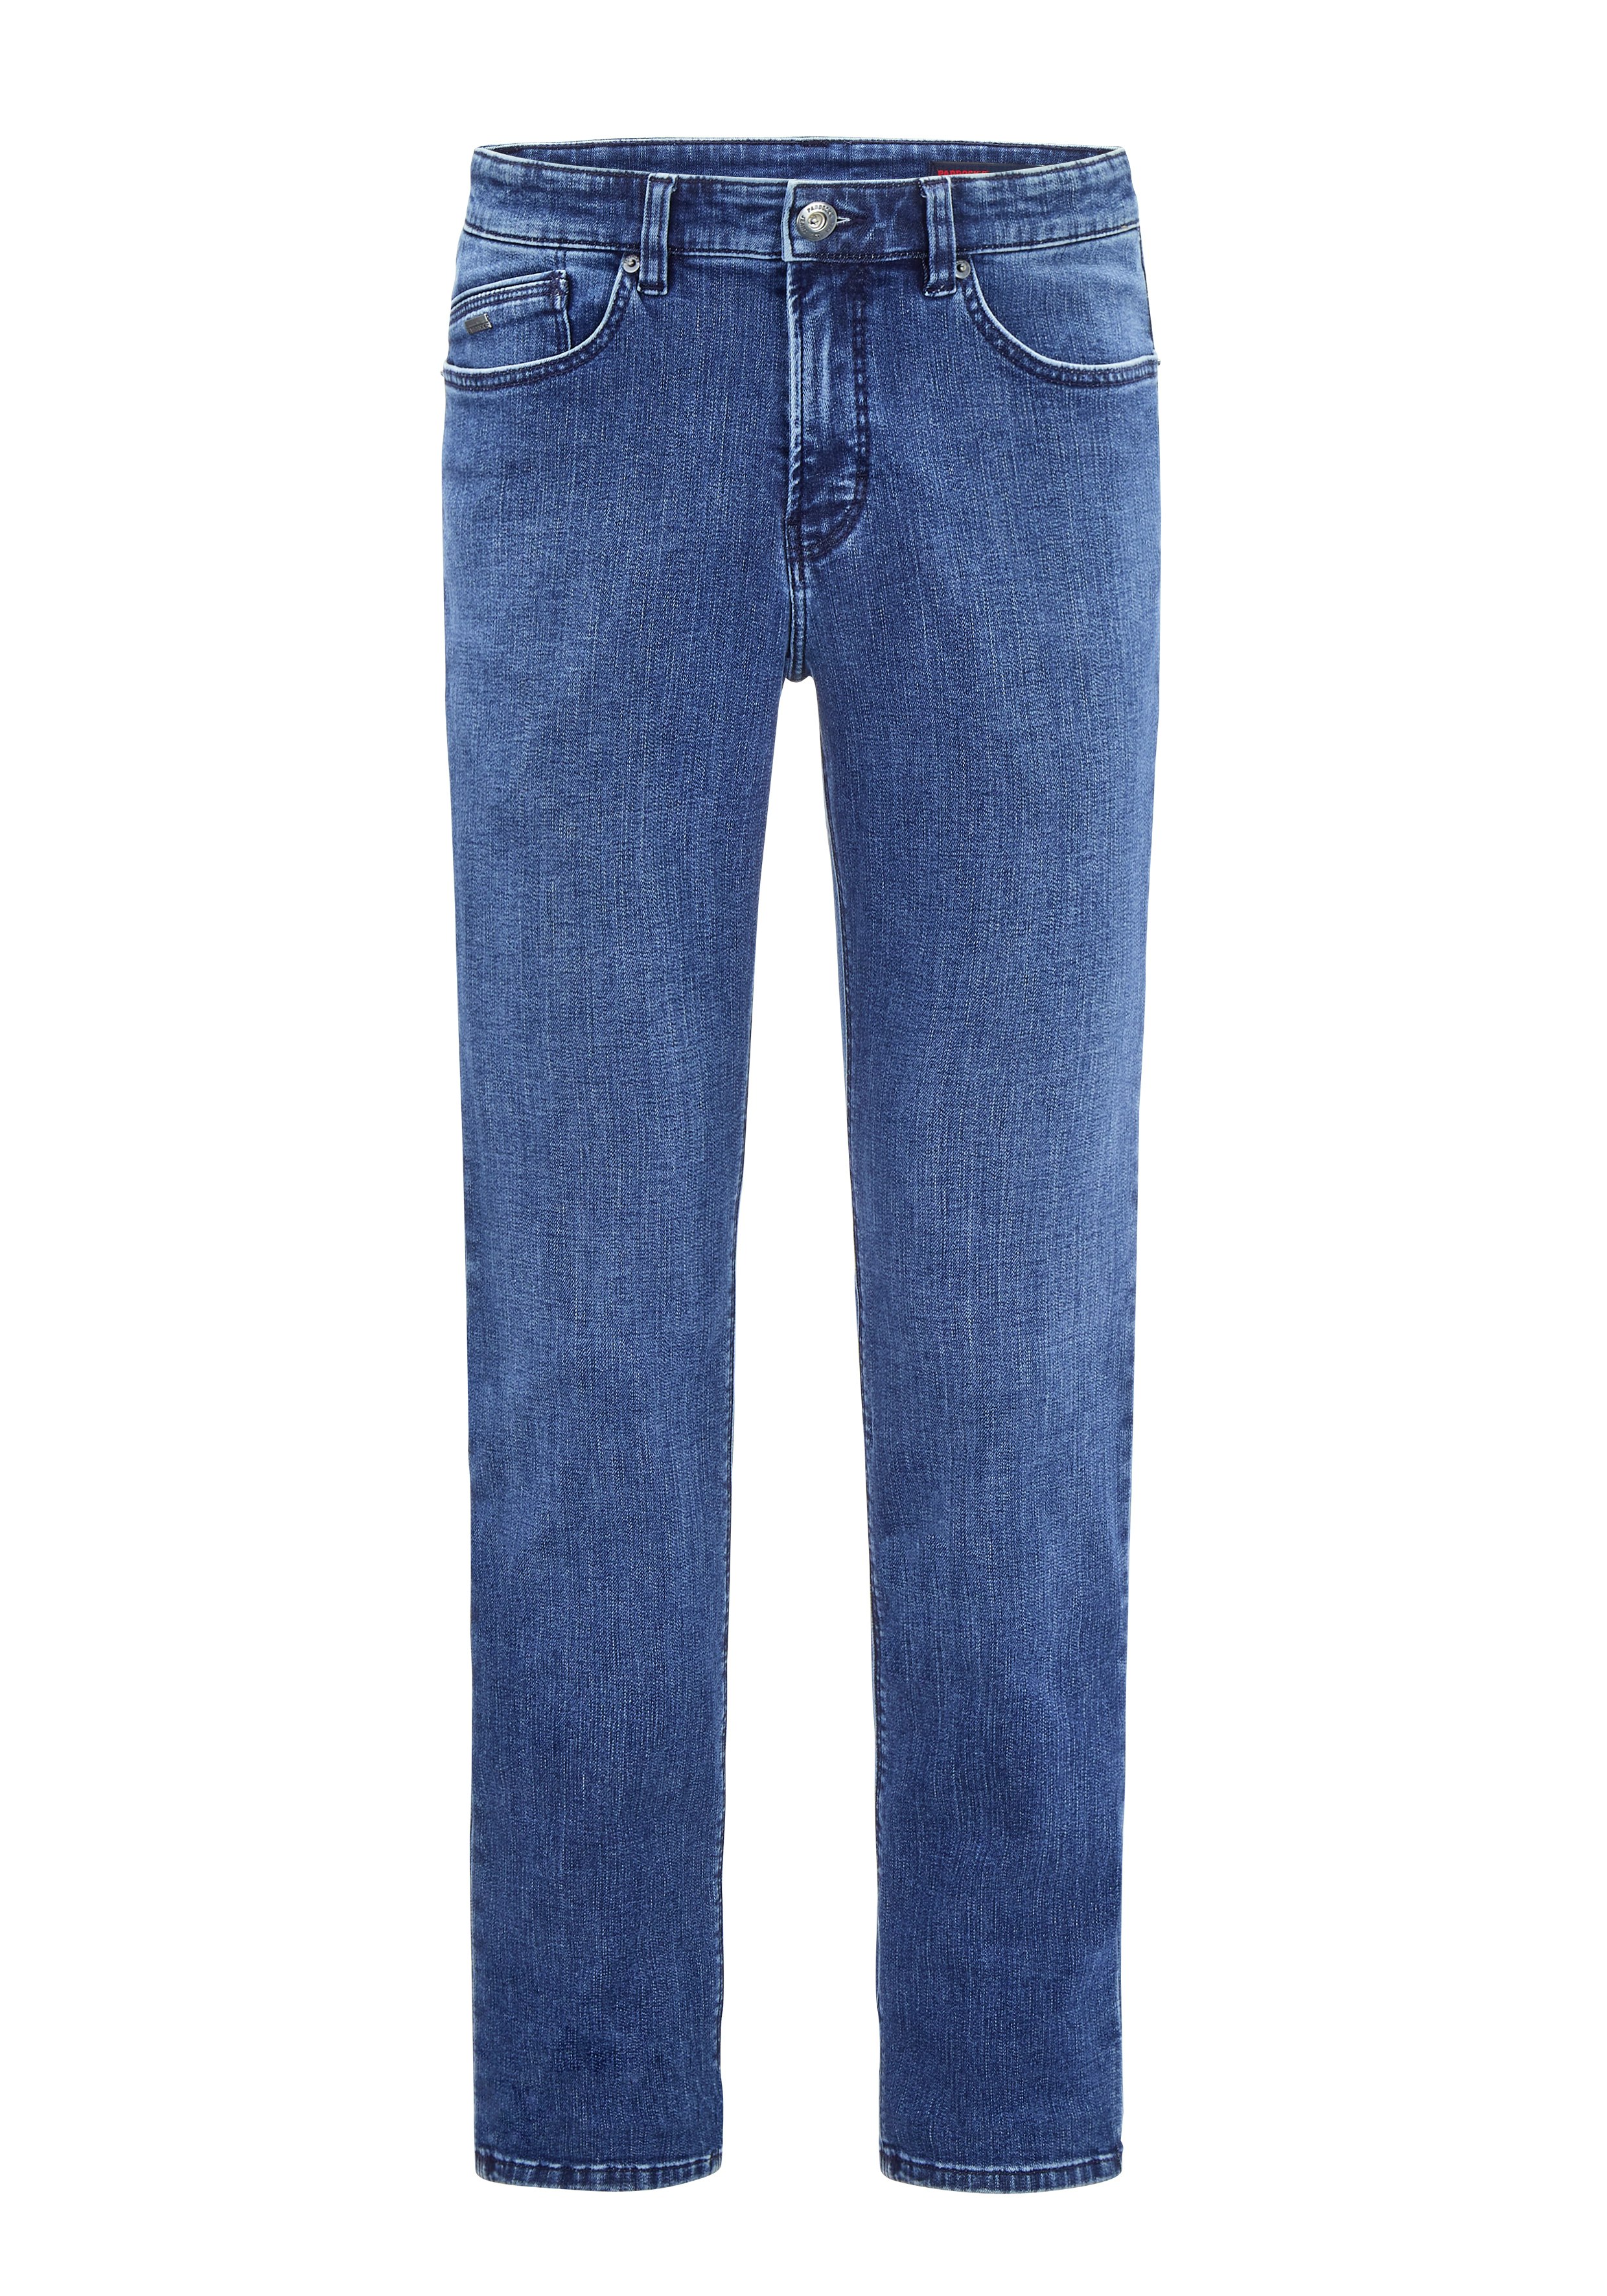 Paddock's Pipe Thermo Jeans Slim Fit dark blue extra lang